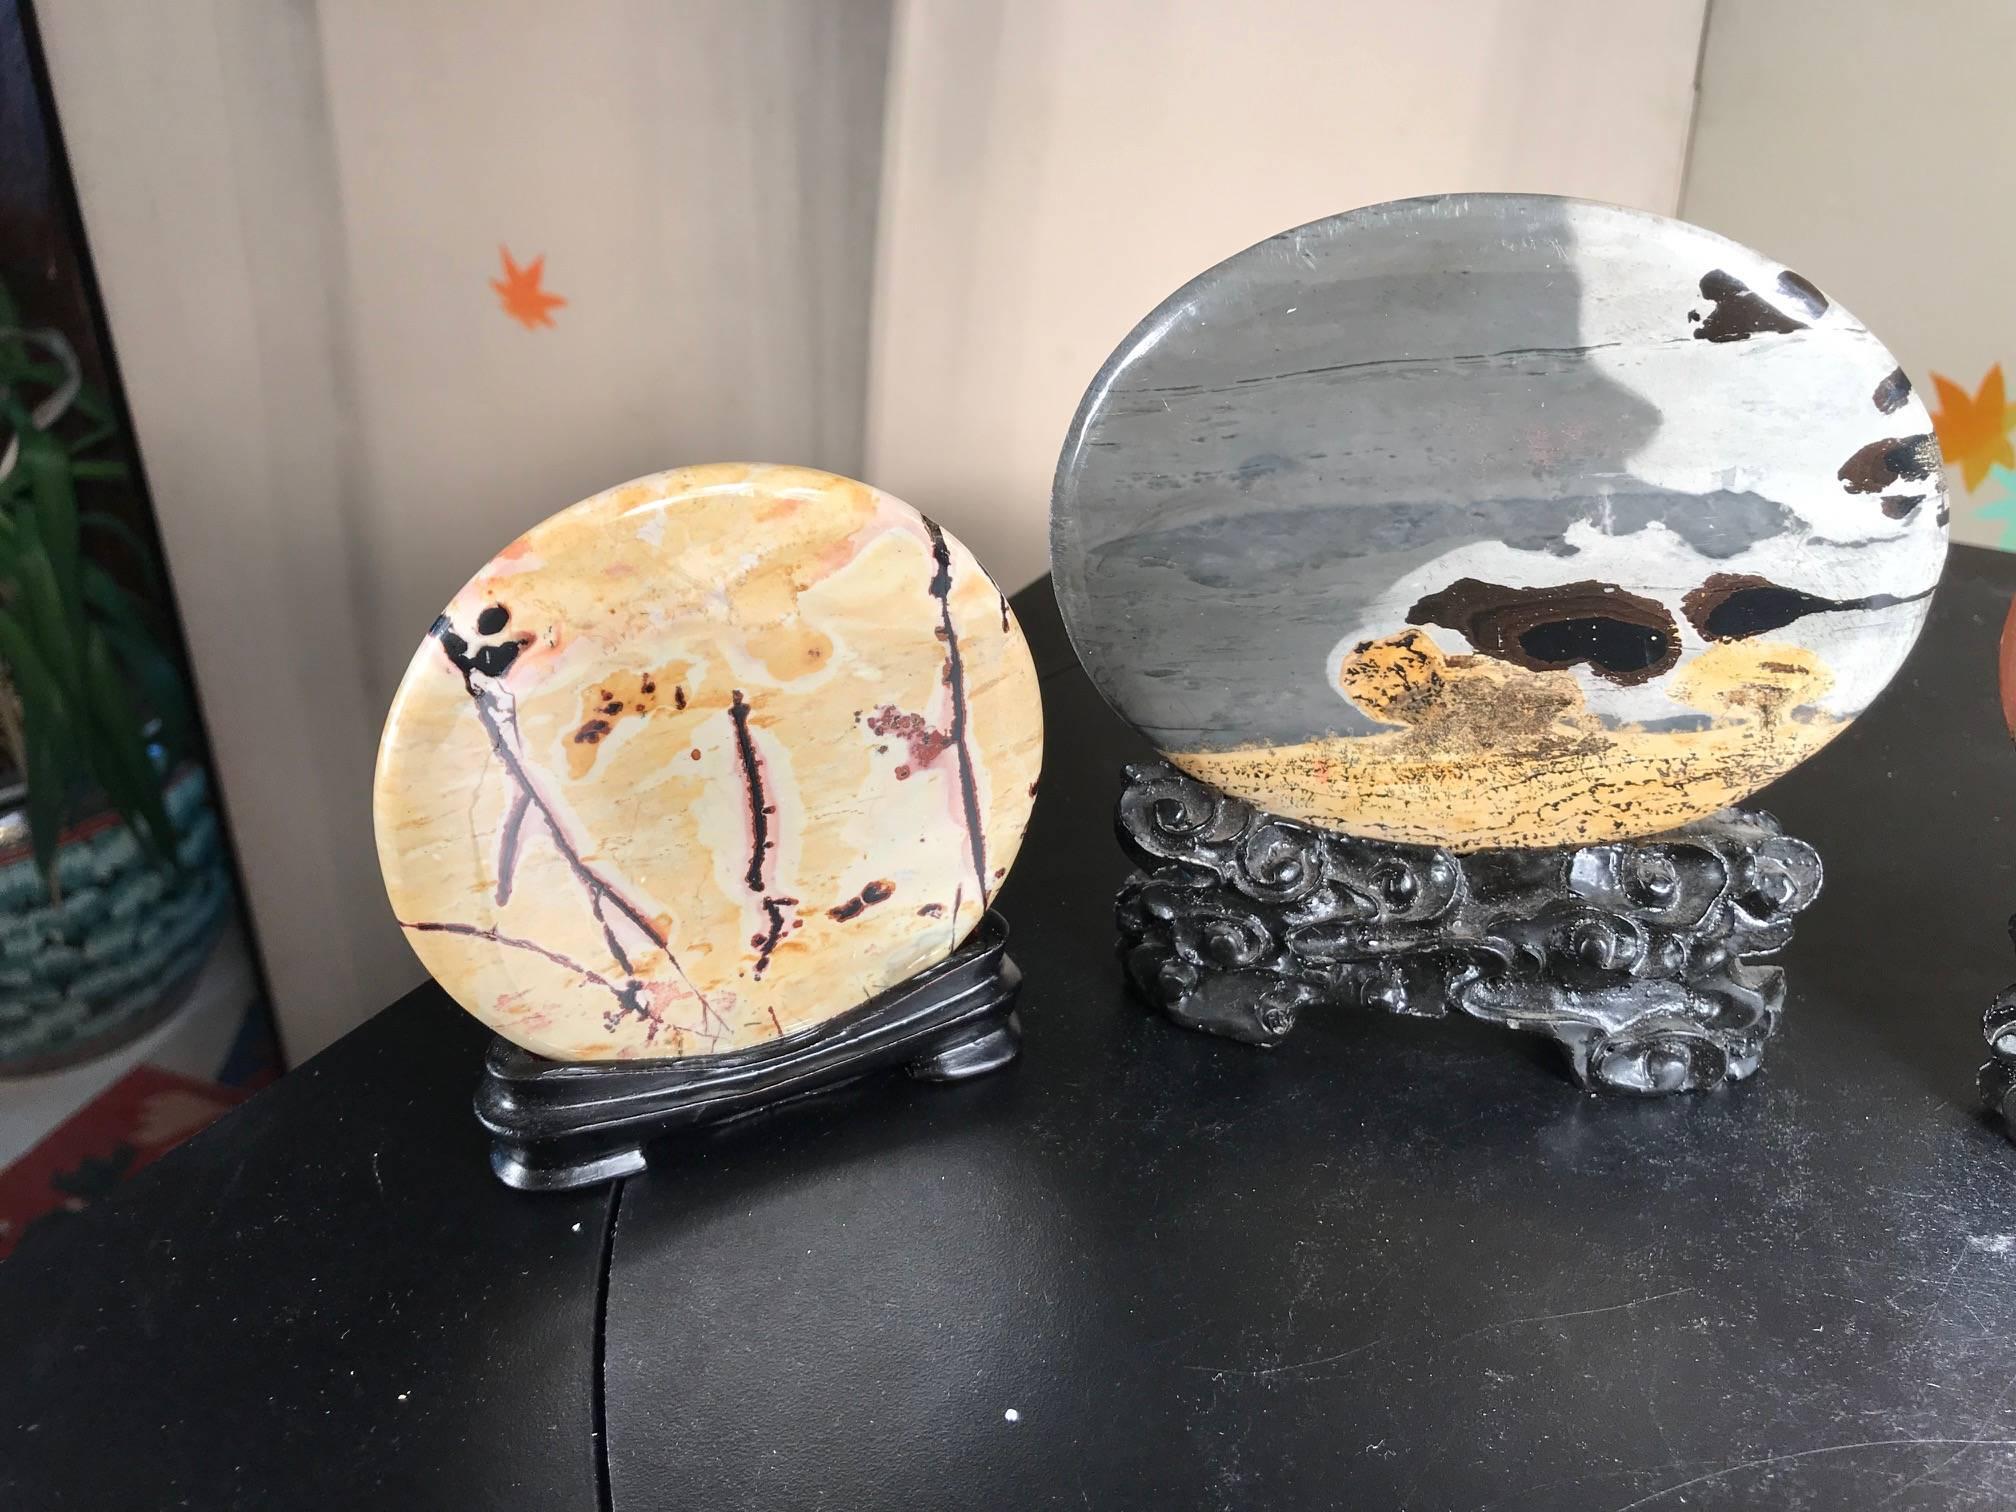 This foursome (4) of Chinese extraordinary natural round viewing stones from China are completely natural stones that simply take your breath away!

Found in Southern China, they are also known as a painting stones Guo Hua as the Chinese believe